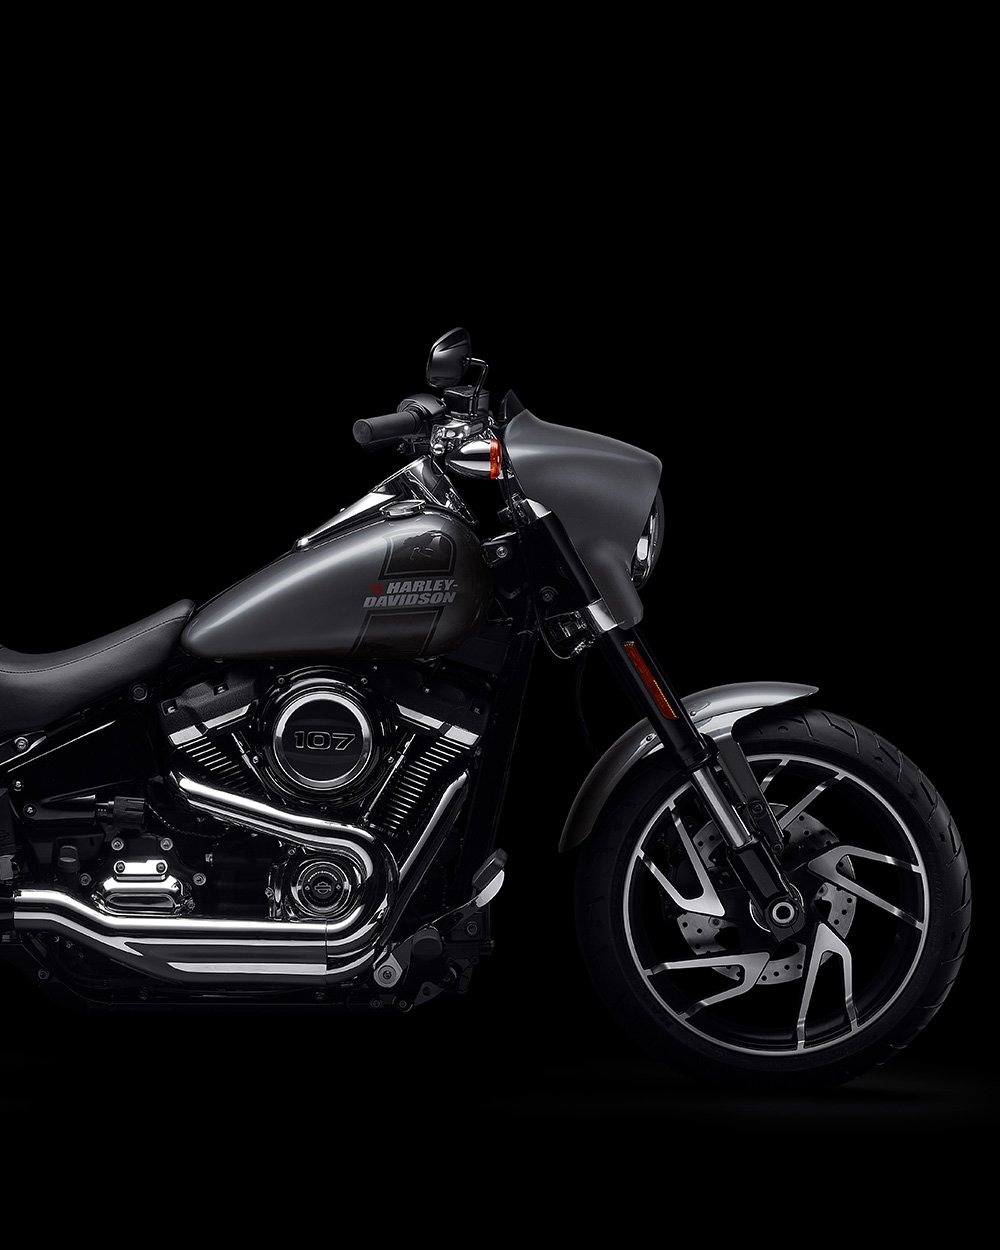 2022 Sport Glide motorcycle parked on the street